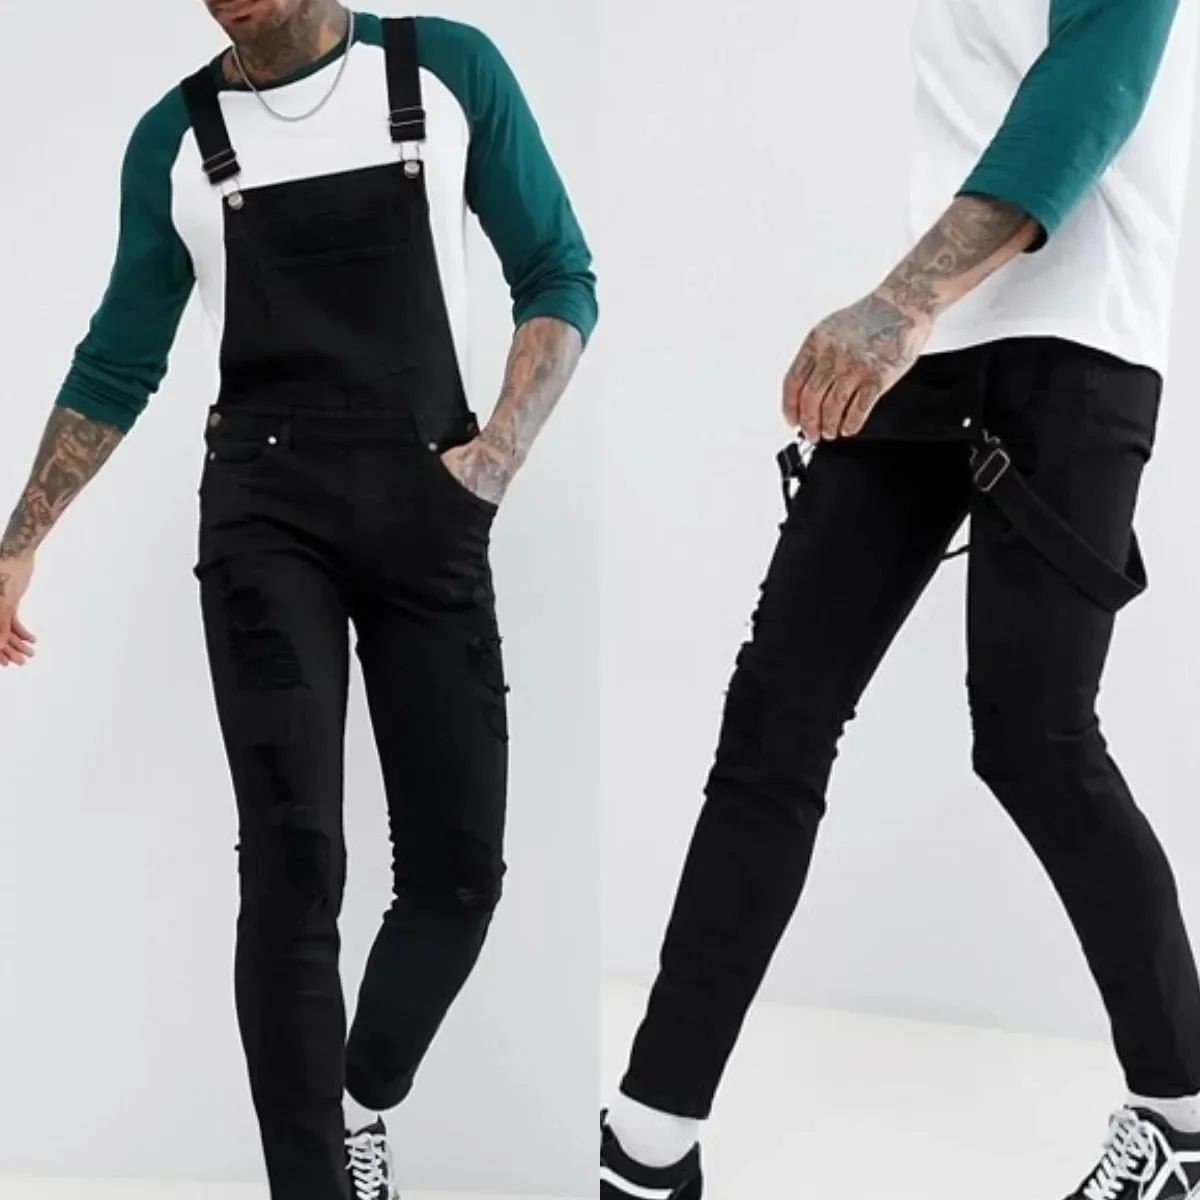 

Men Overalls Jeans Ripped Bib Denim Jumpsuits New Fashion Srping Summer Casual Streetwear Cargo Work Pants Trousers Lugentolo